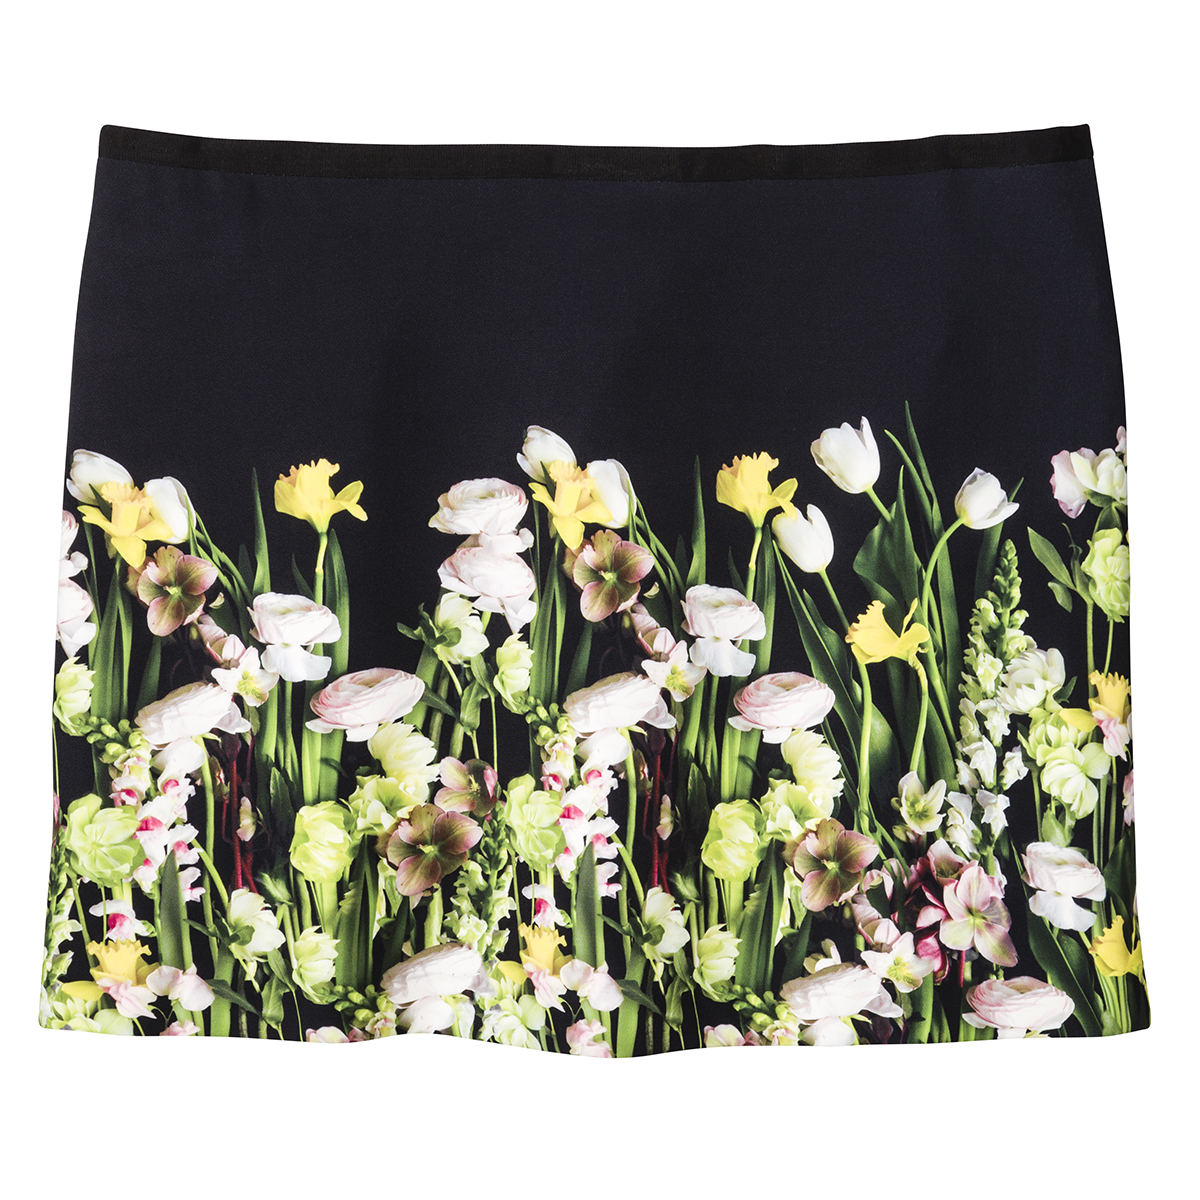 Photo Floral Skirt, $30